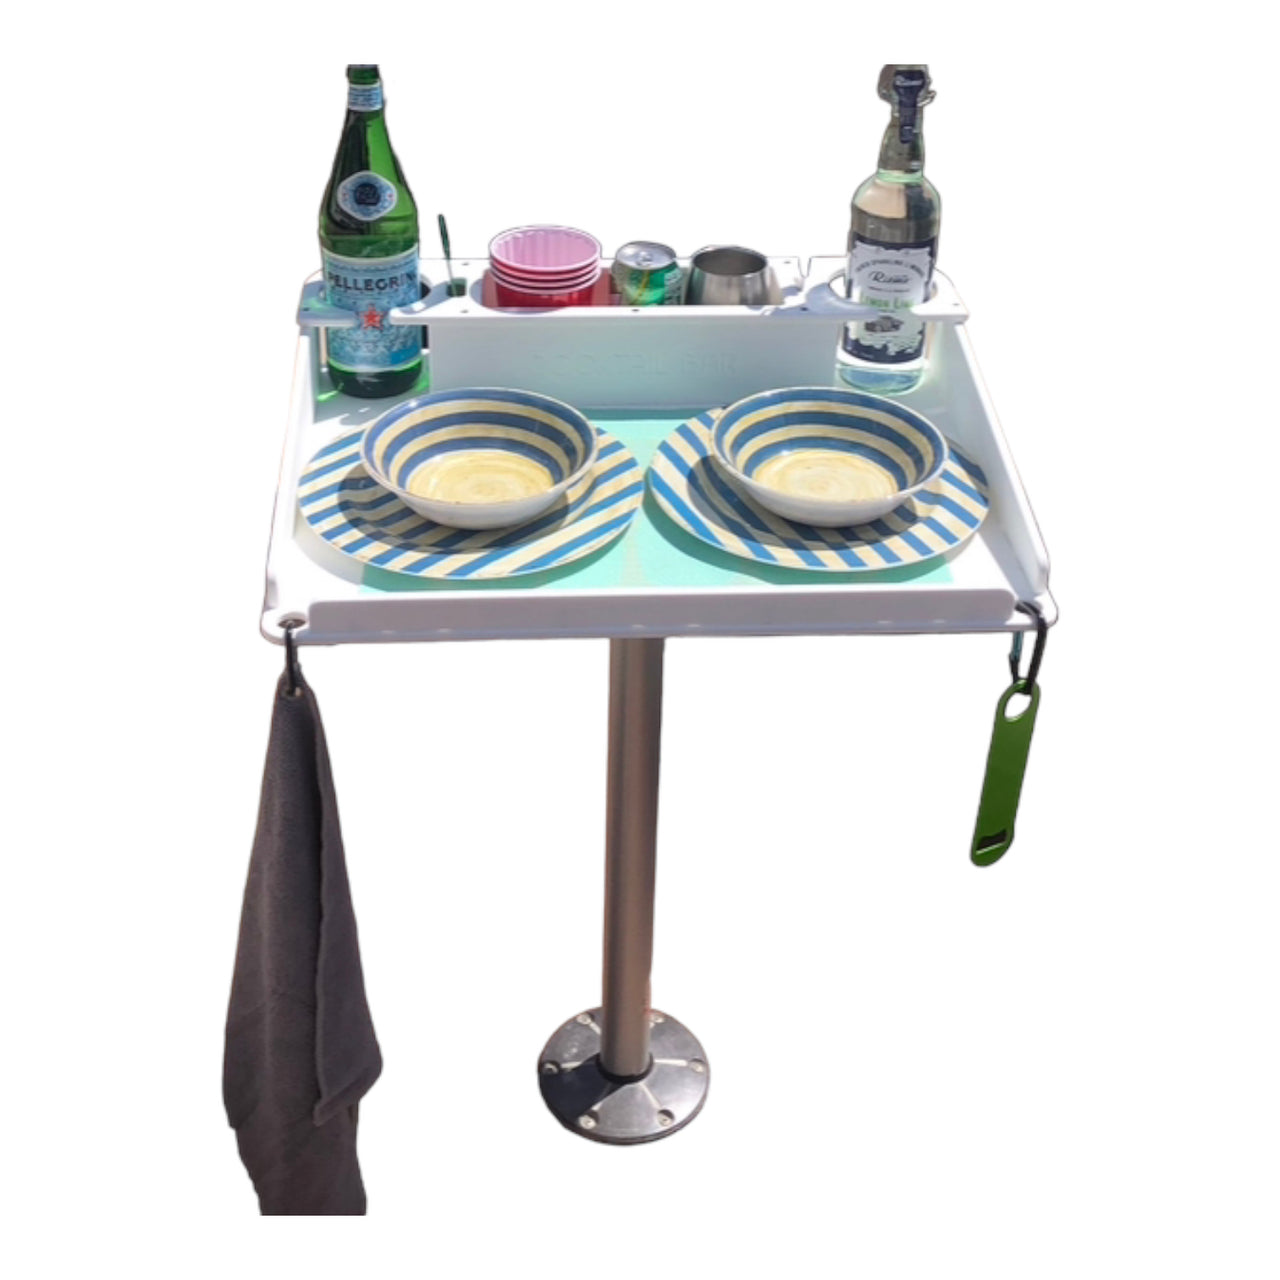 Docktail Utility Boat Table with Pedestal Adapter Plate - Choose Your Color